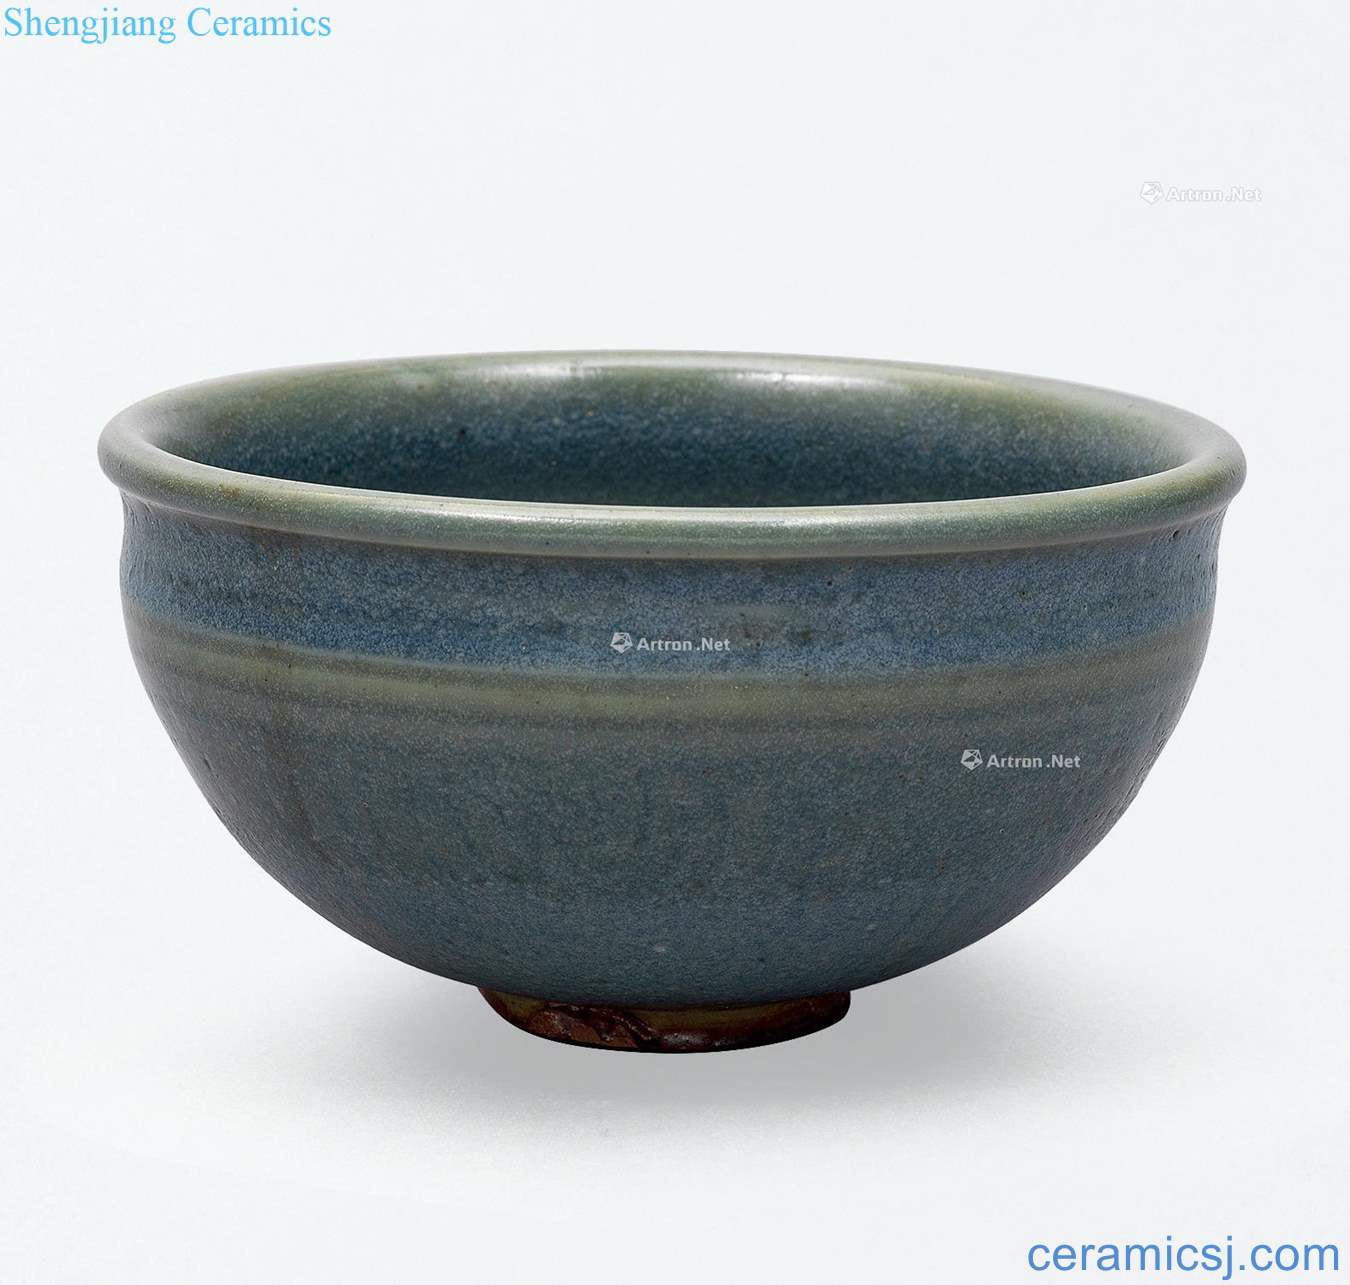 The song dynasty Yao state blue glazed pot